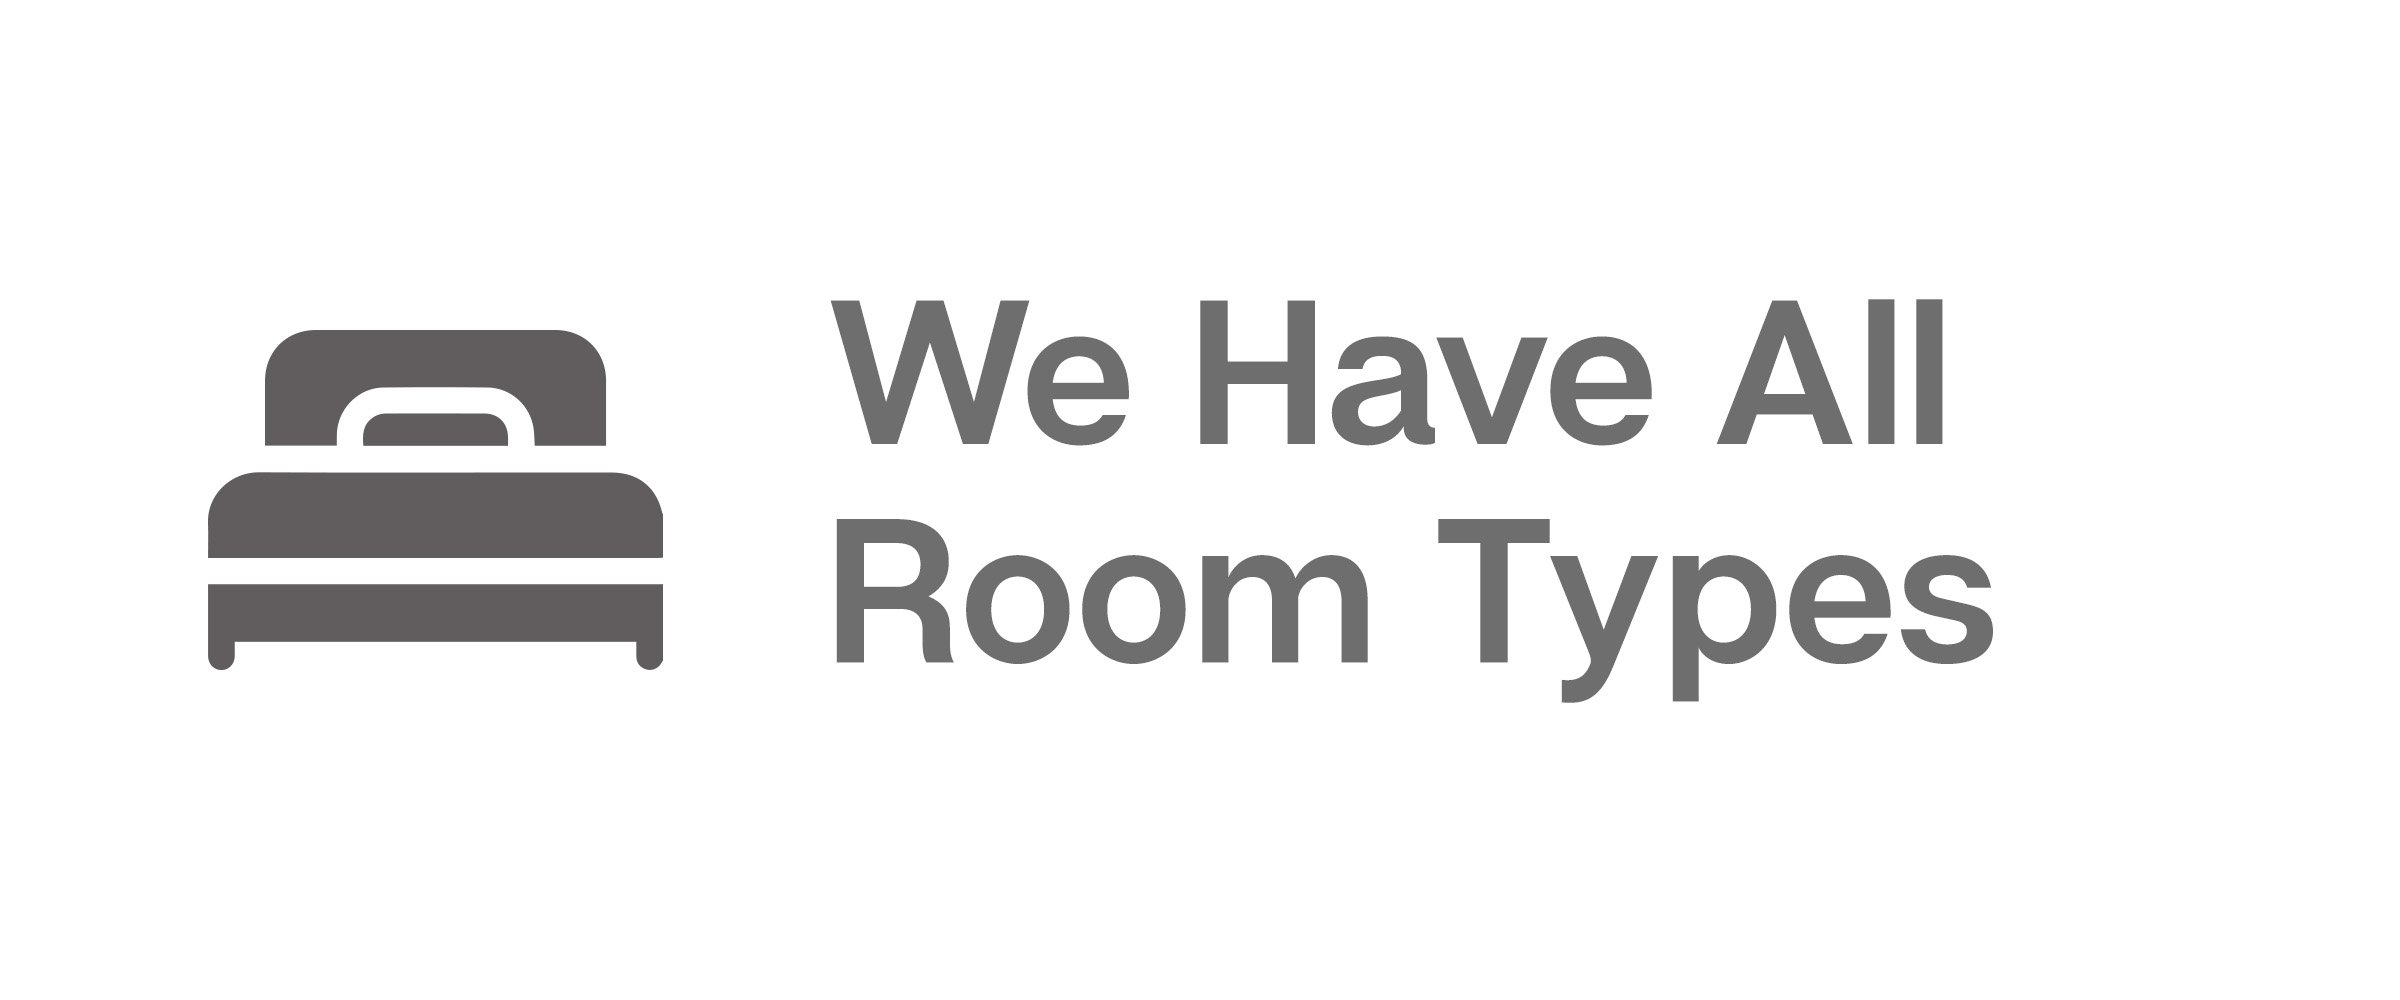 We have all Room Types